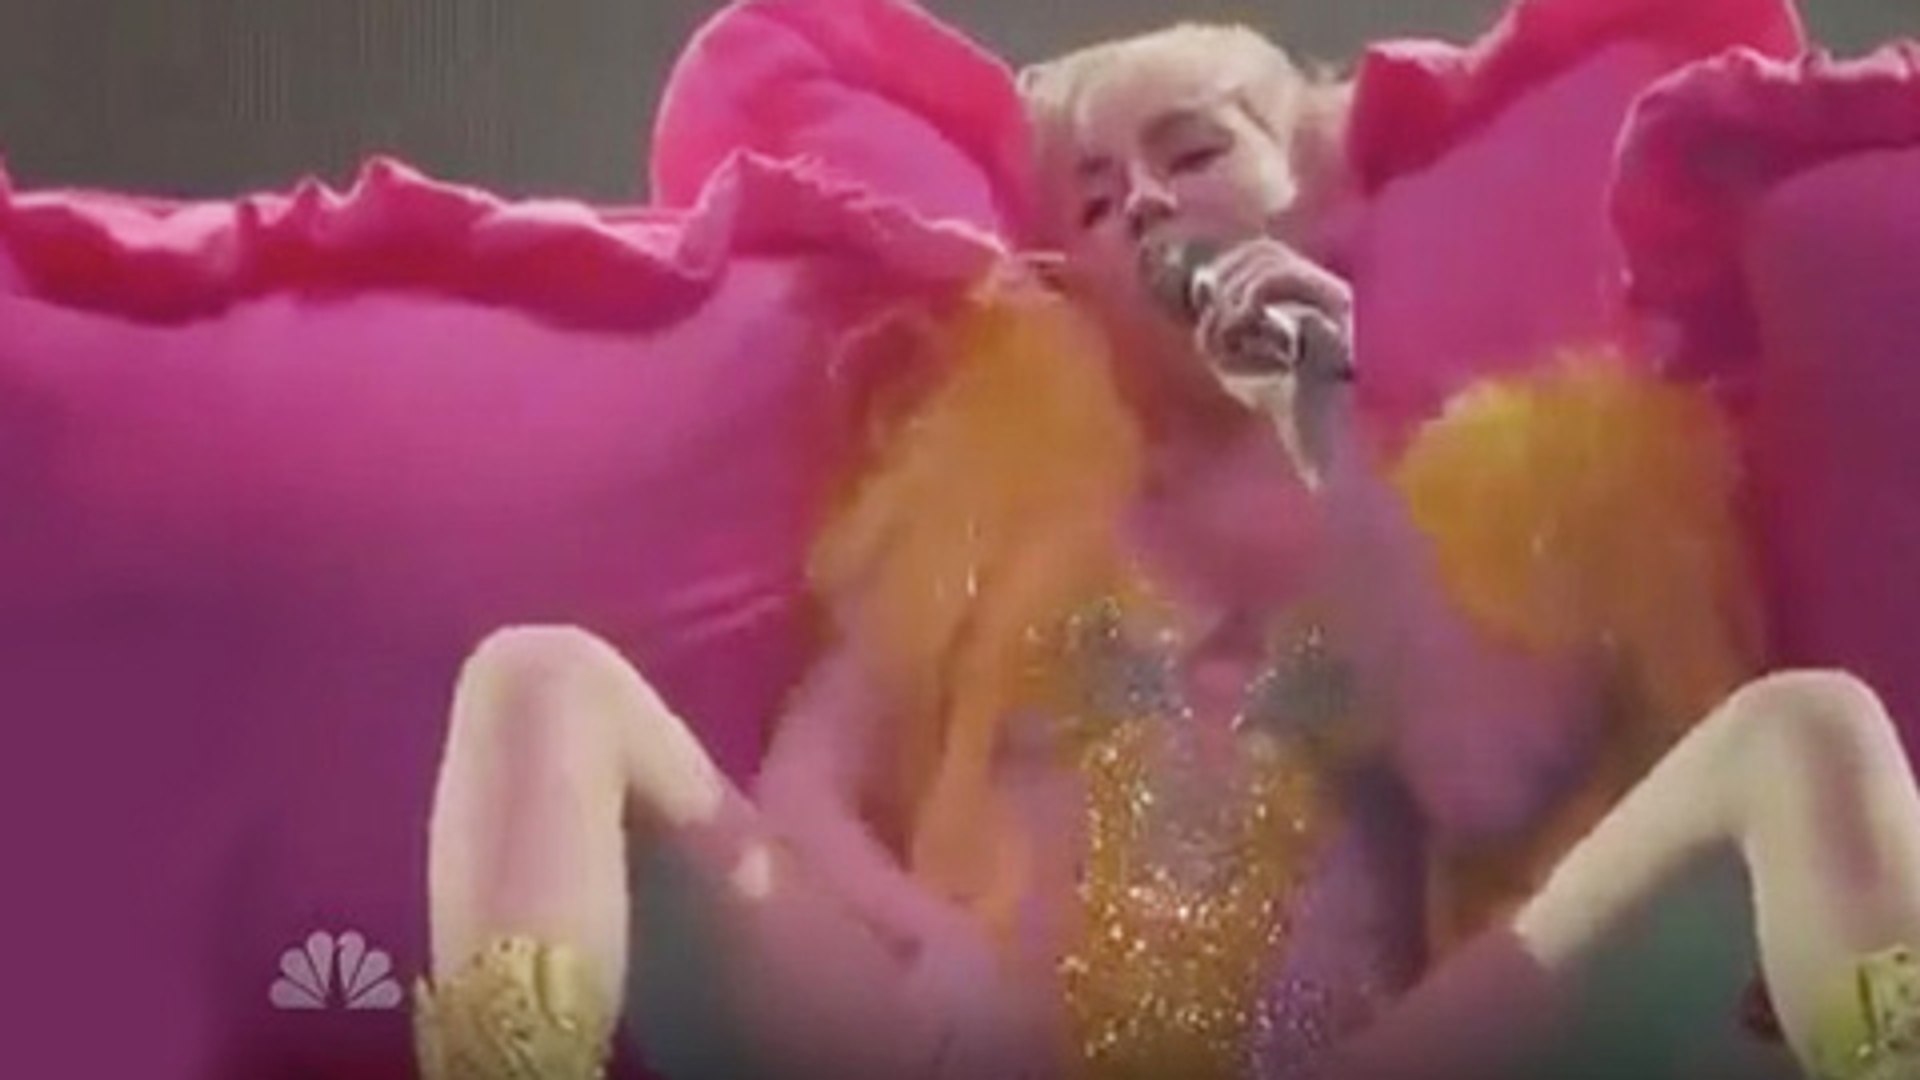 Miley Cyrus EXPLICIT Performance Lands NBC In Trouble